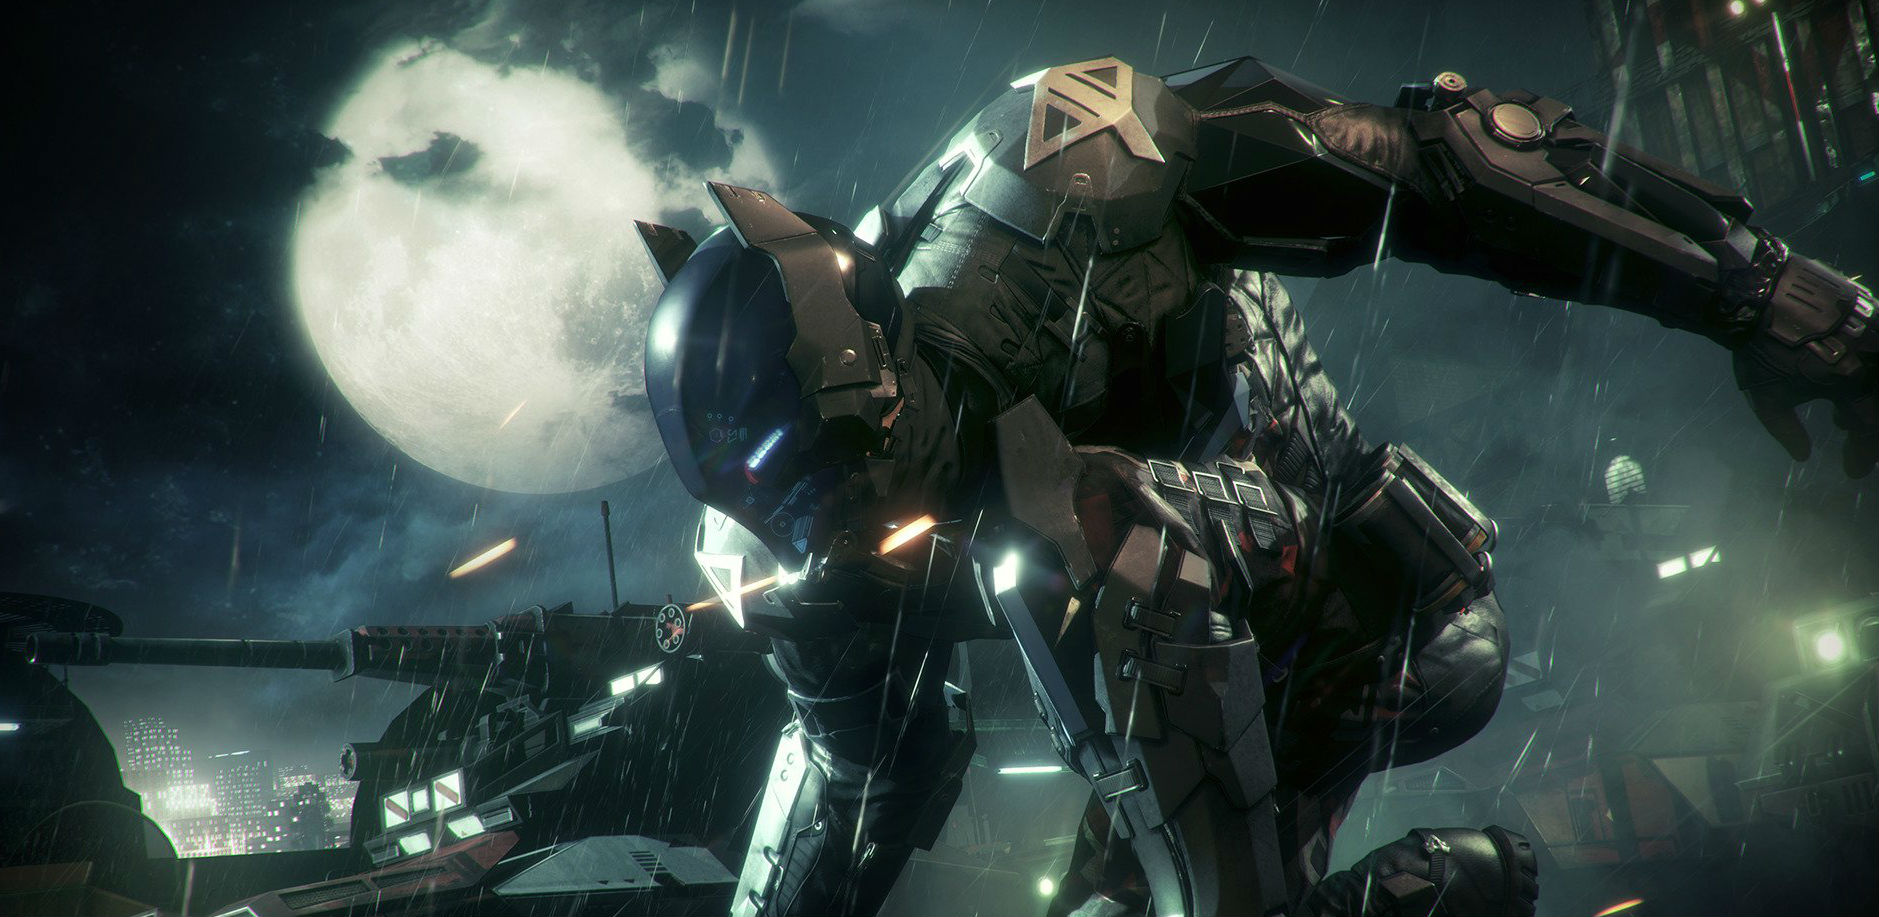 Batman: Arkham Knight system requirements revealed | PC Gamer